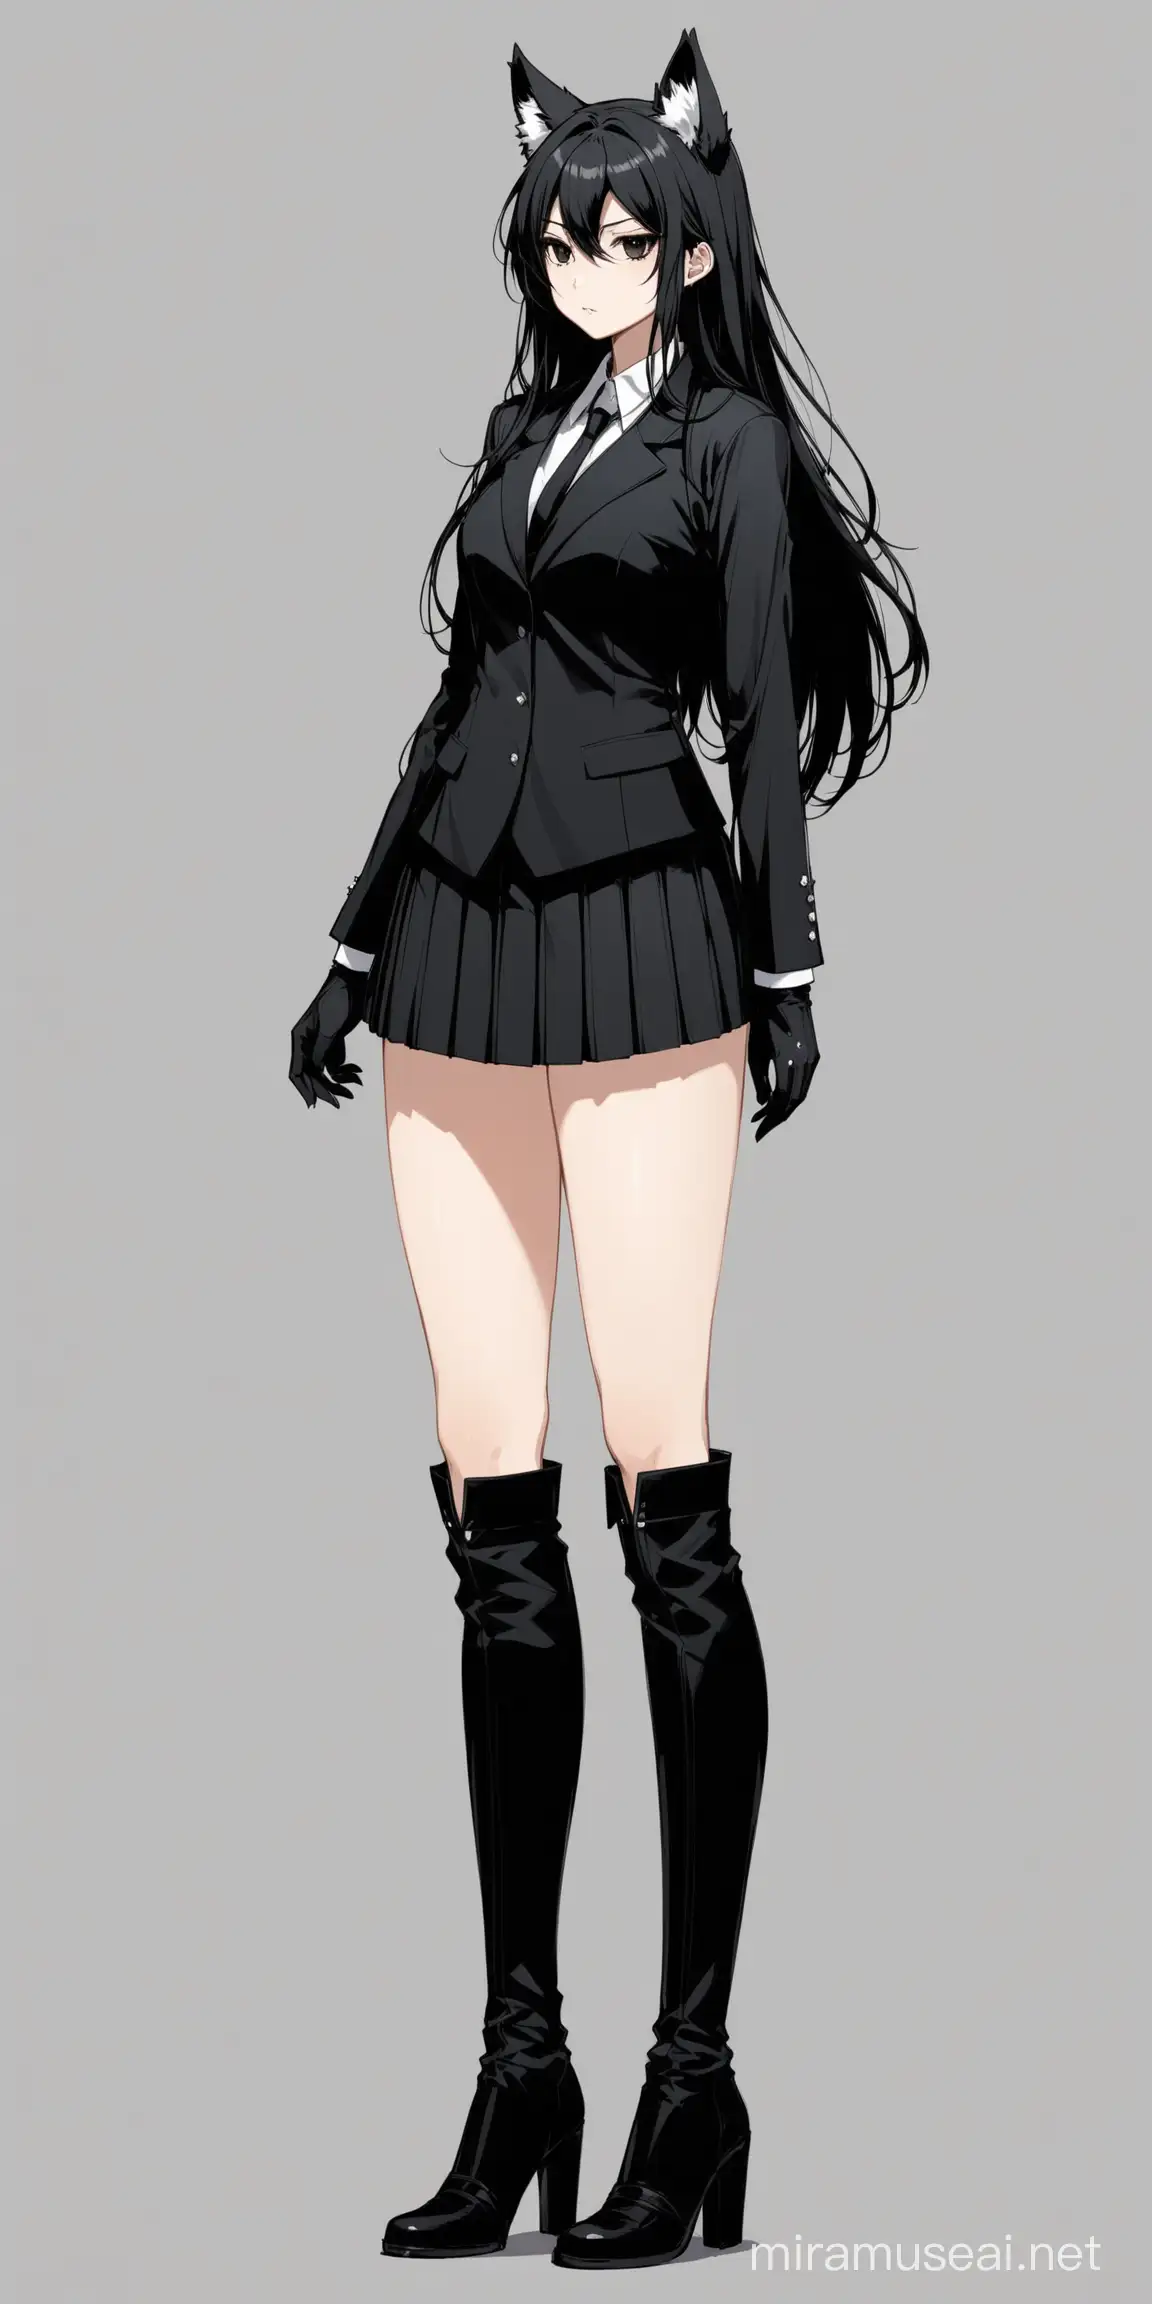 Tall Wolf Girl in Elegant Black Attire with Neutral Expression